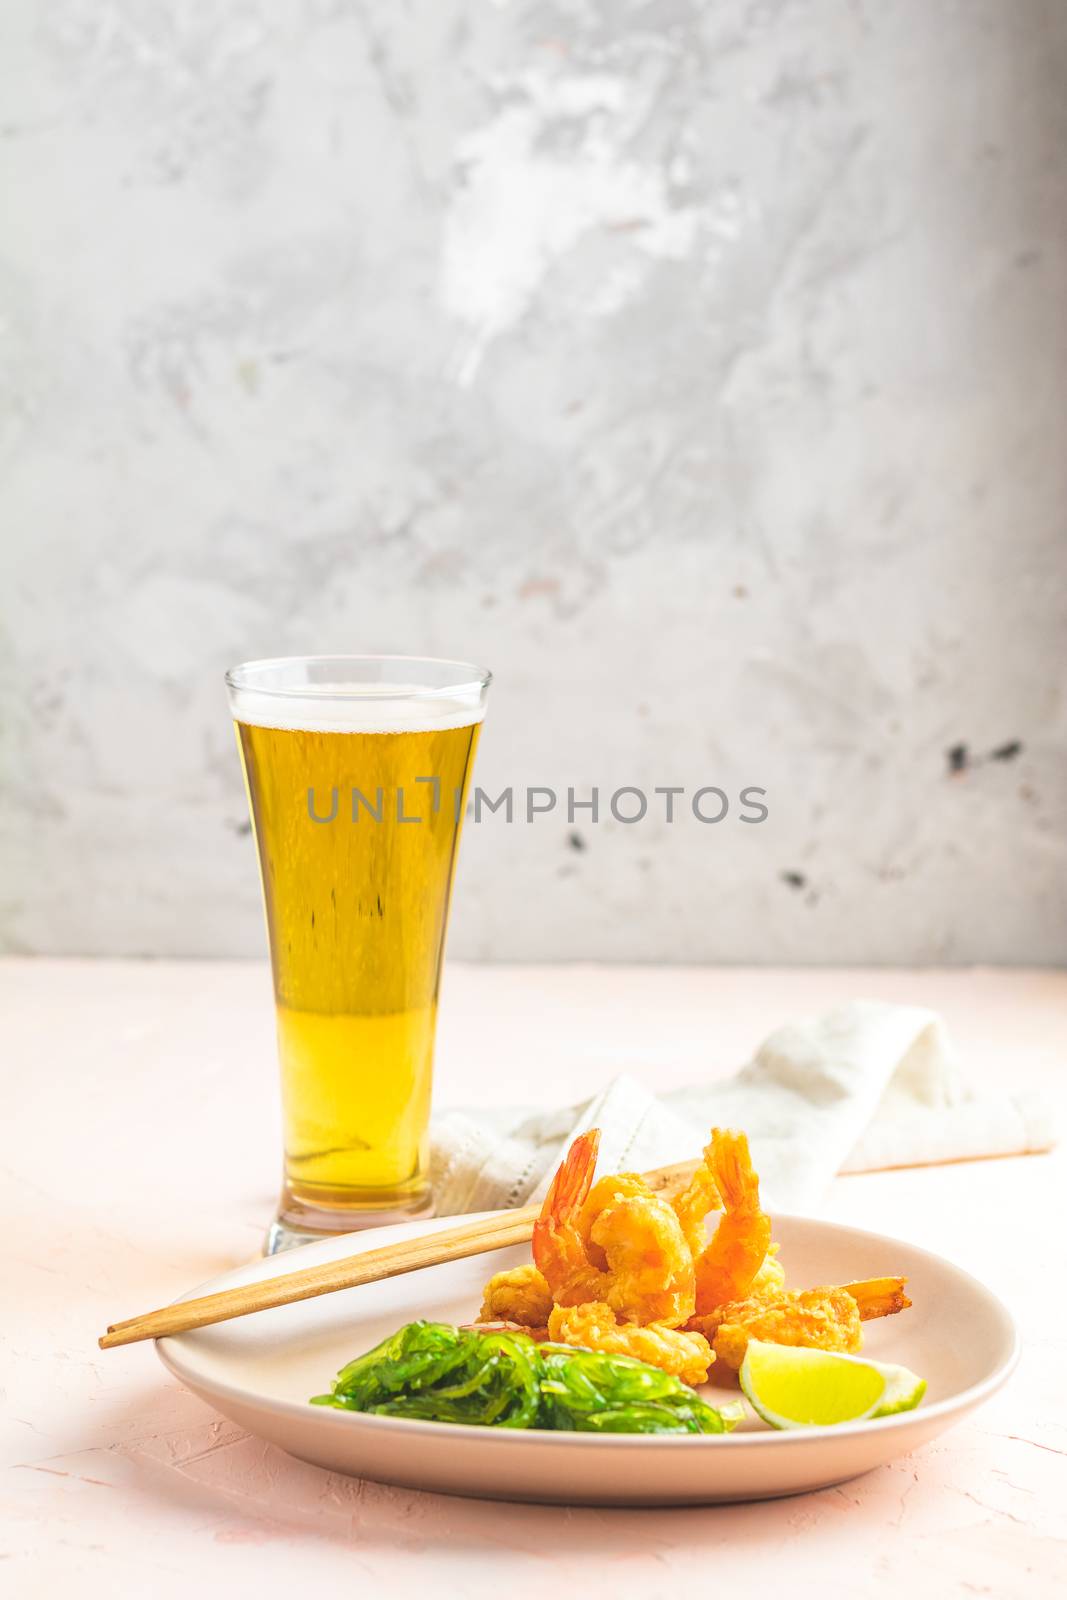 Fried Shrimps tempura with lime in light plate and glass of beer on pink or peach concrete surface background. Copy space Seafood tempura dish served japanese or eastern Asia style with chopsticks